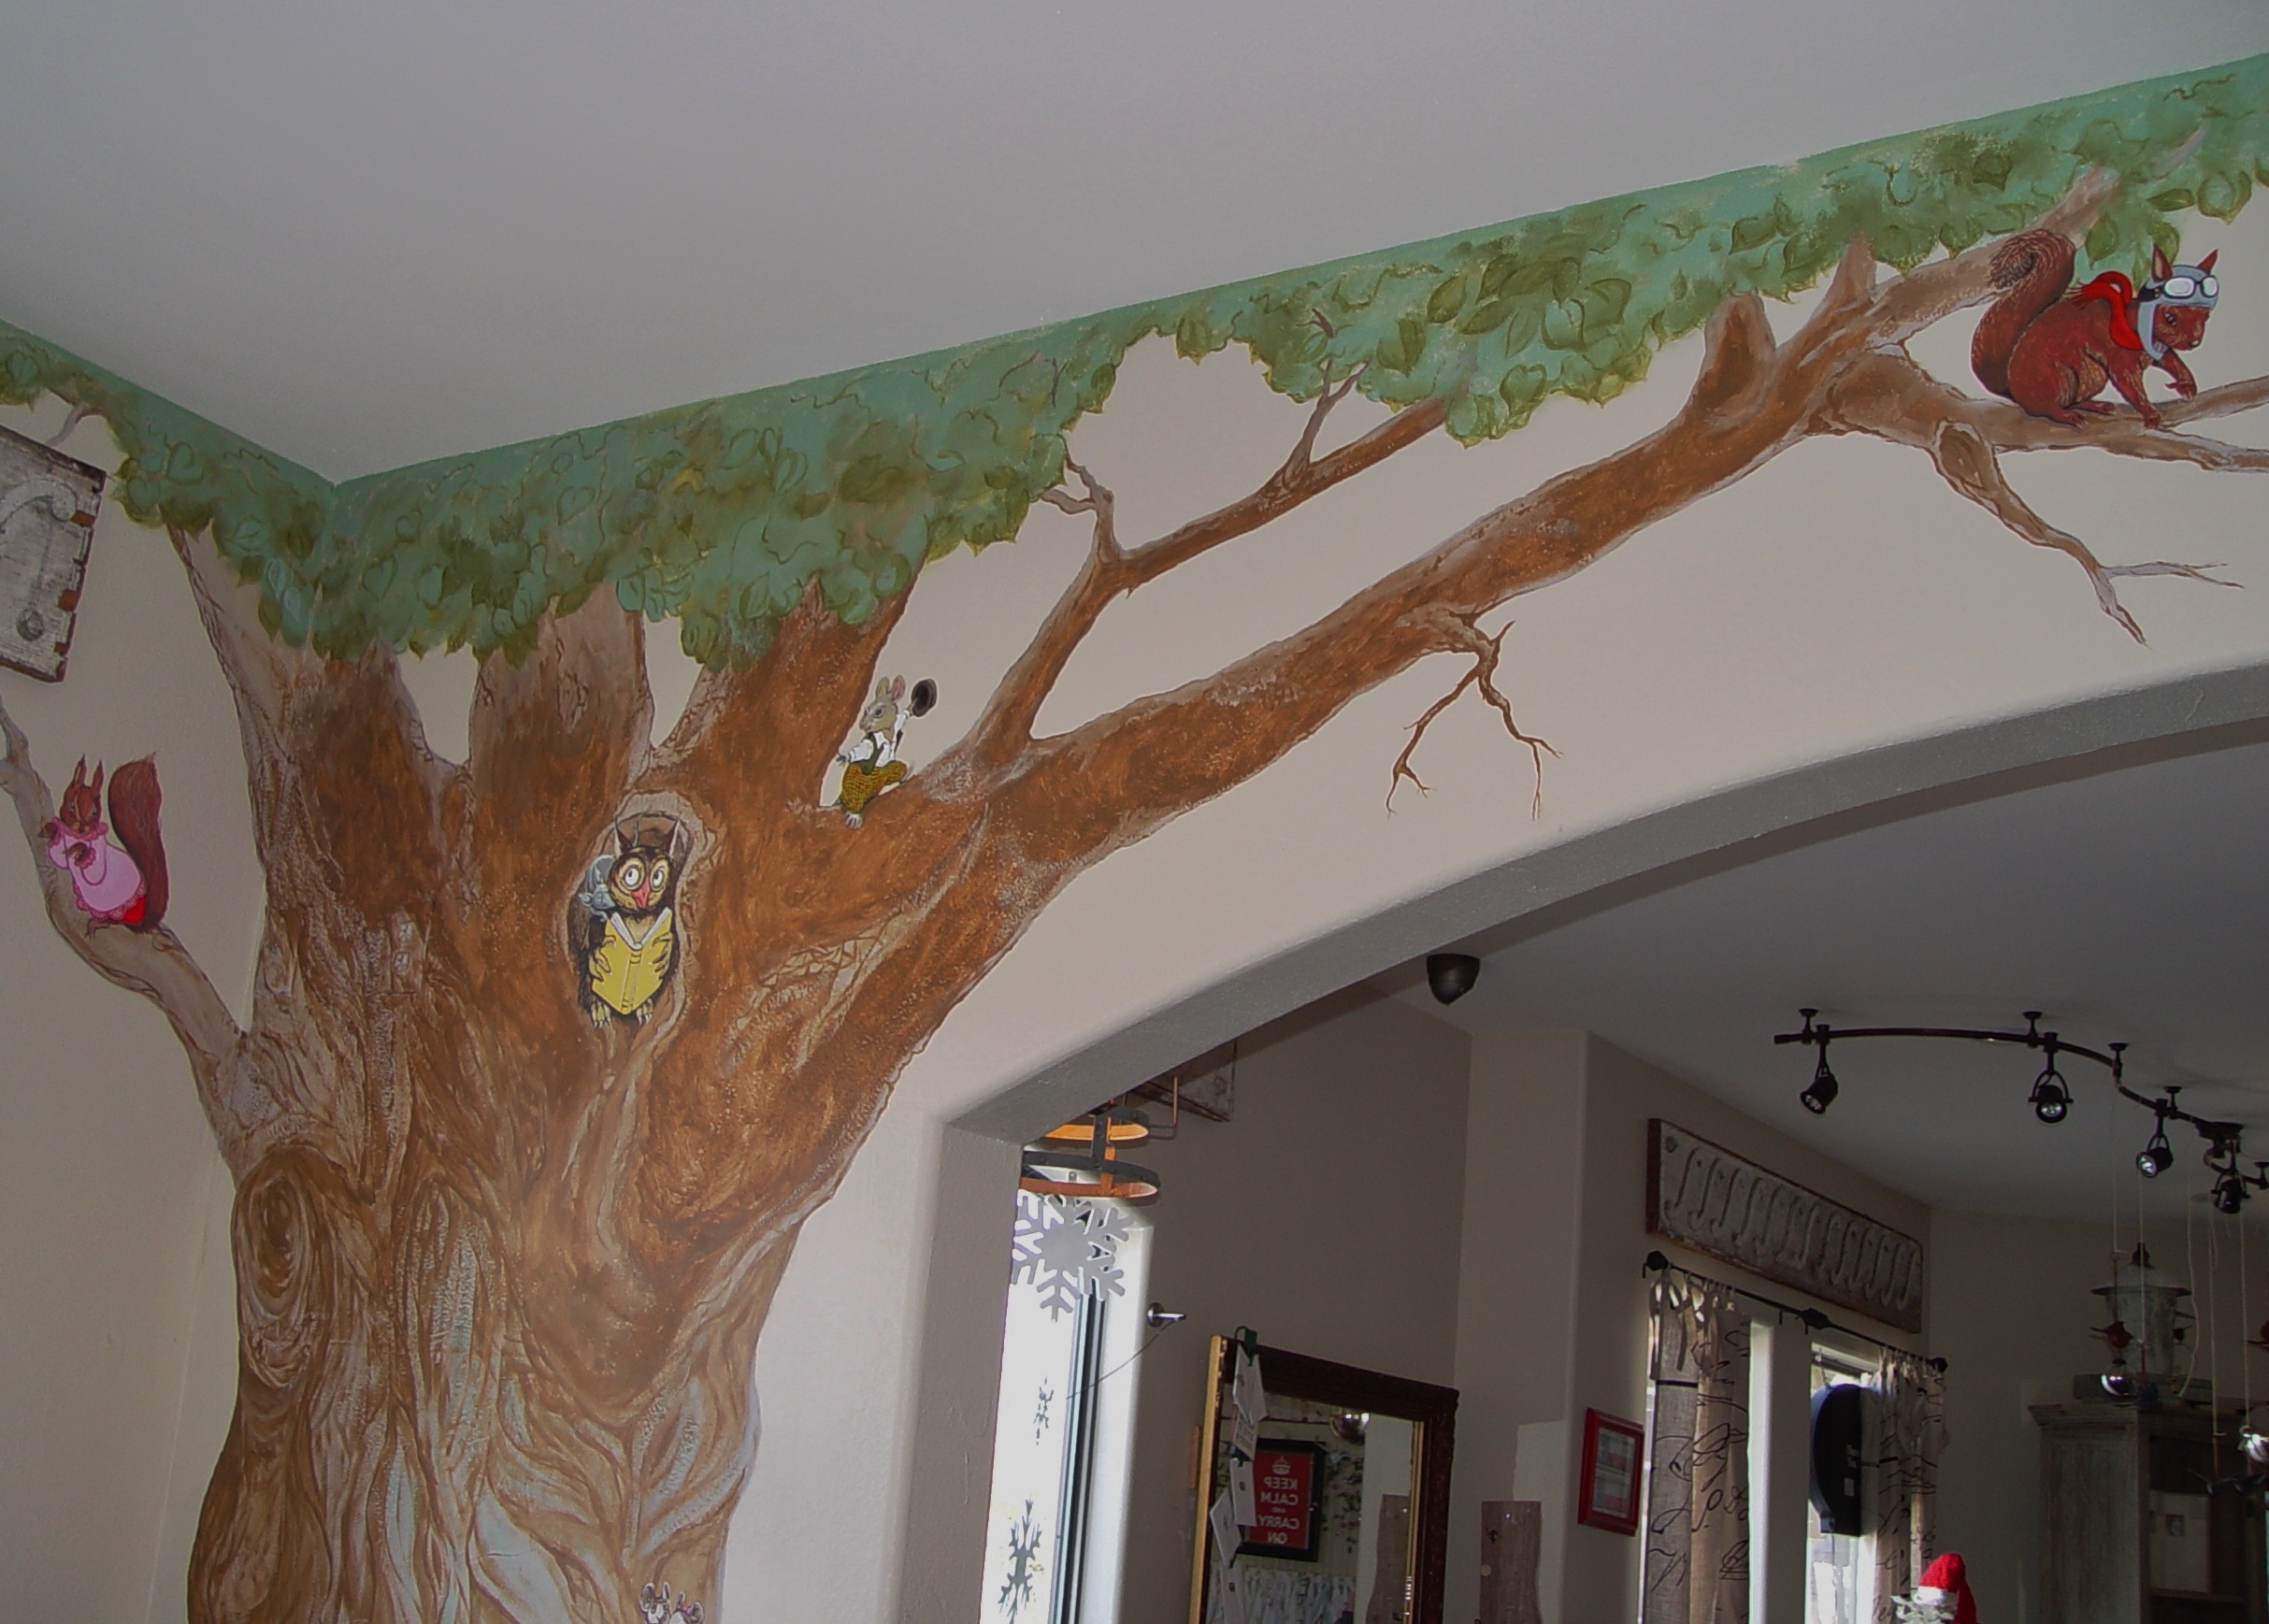 Nursery,baby,children,whimsical,animals,rabbits,mice,mouse,owl,book,squirrel,birds,tree,painted,mural,Sandy Dusek,Texas Artist,DusekArtGallery.com